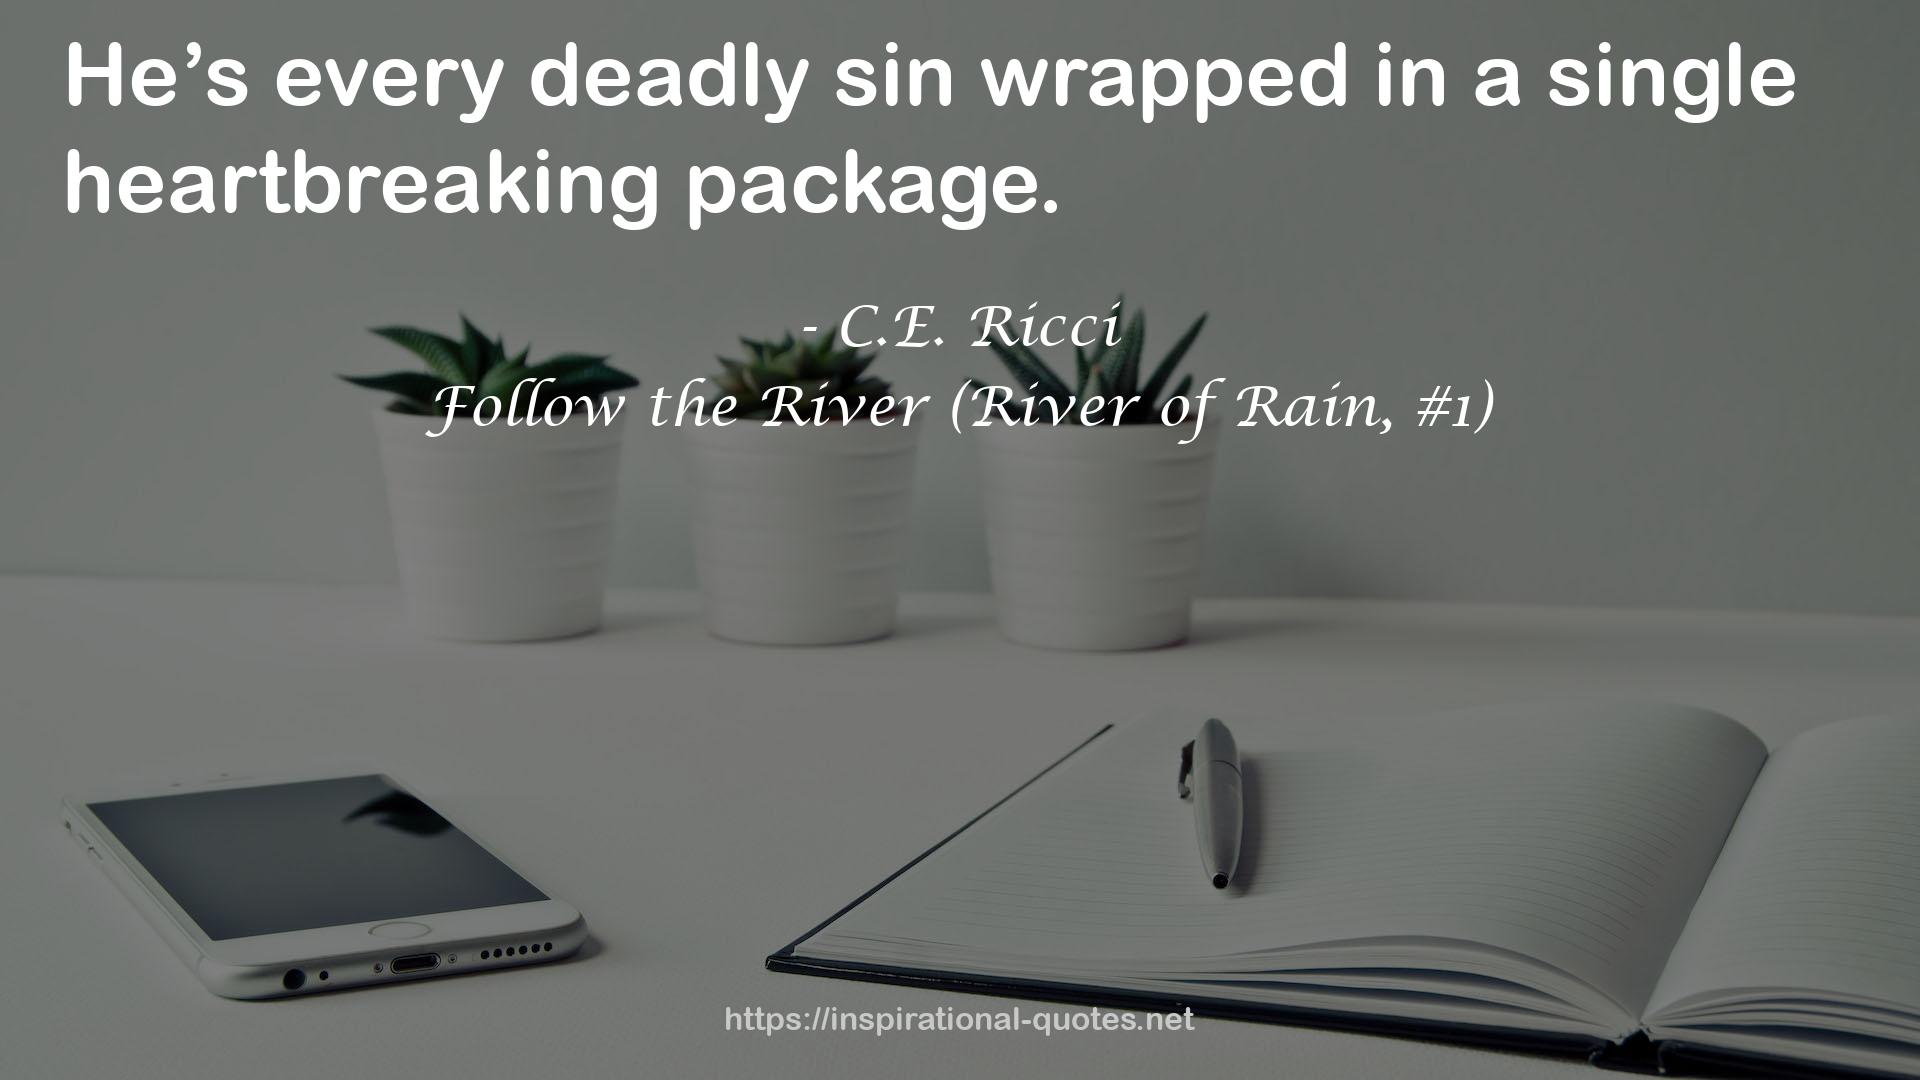 Follow the River (River of Rain, #1) QUOTES